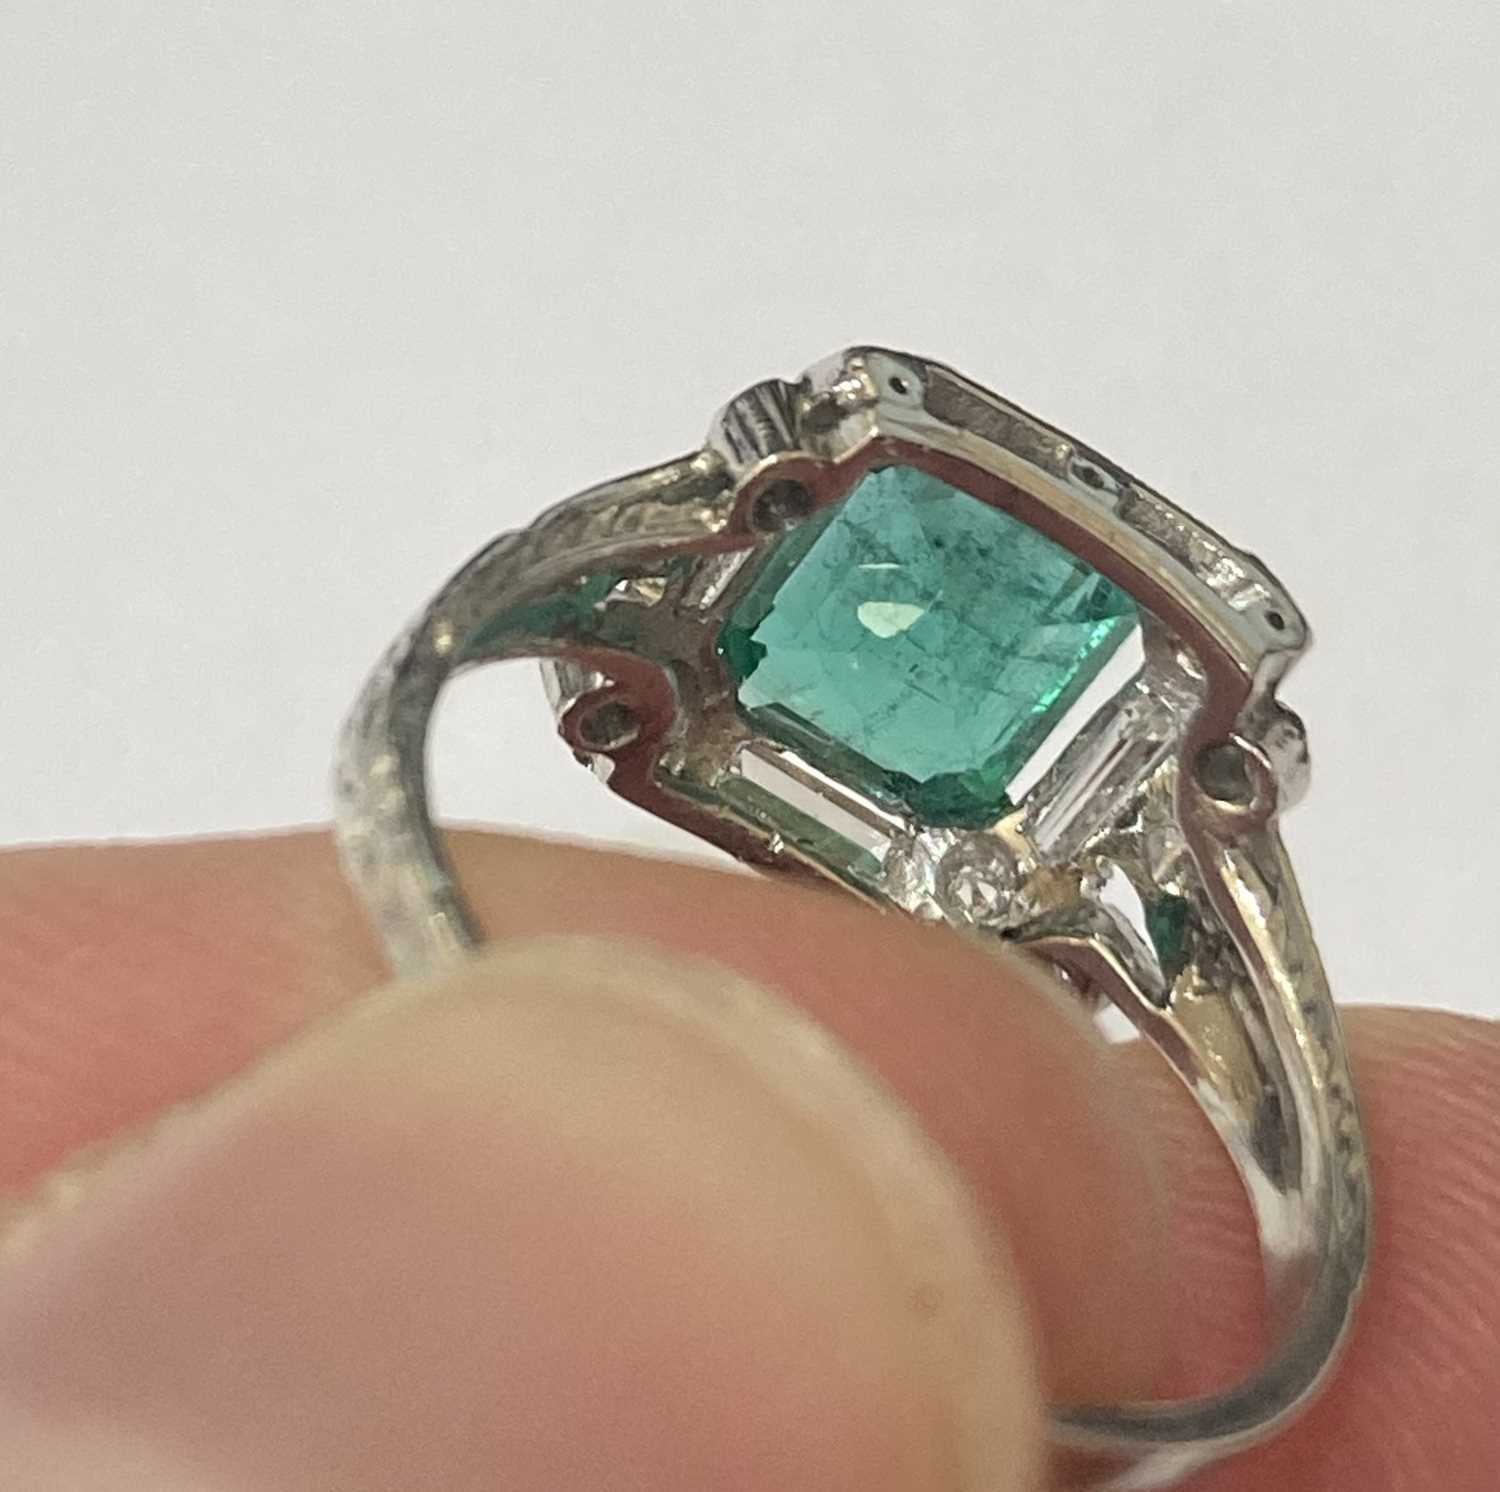 An Emerald and Diamond Ring - Image 4 of 6